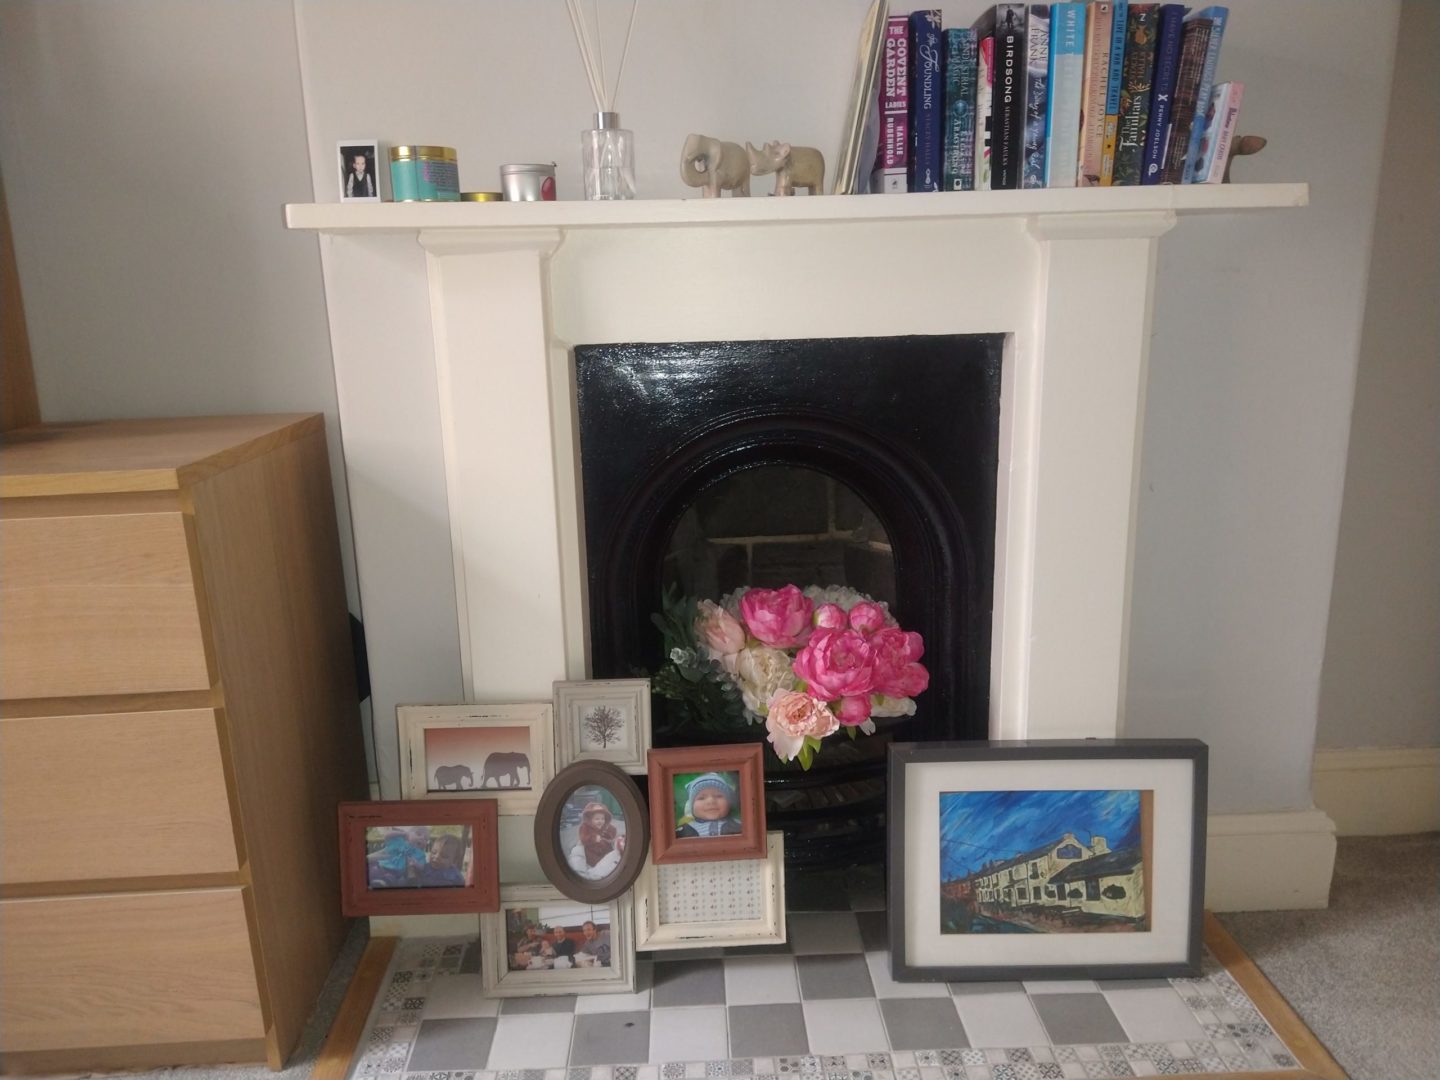 A fireplace with a white surround and black grate. Inside the grate is a bunch of artificial flower with dark and light pink. In front of the fire place are photo frames. One of the family members and the other is a picture of a pub hand painted. The mantle piece is cluttered and has photos, candles, a fragrant infuser, statues of an elephant, rhino next to a stack of books with a statue of a hippo hiding at the end.